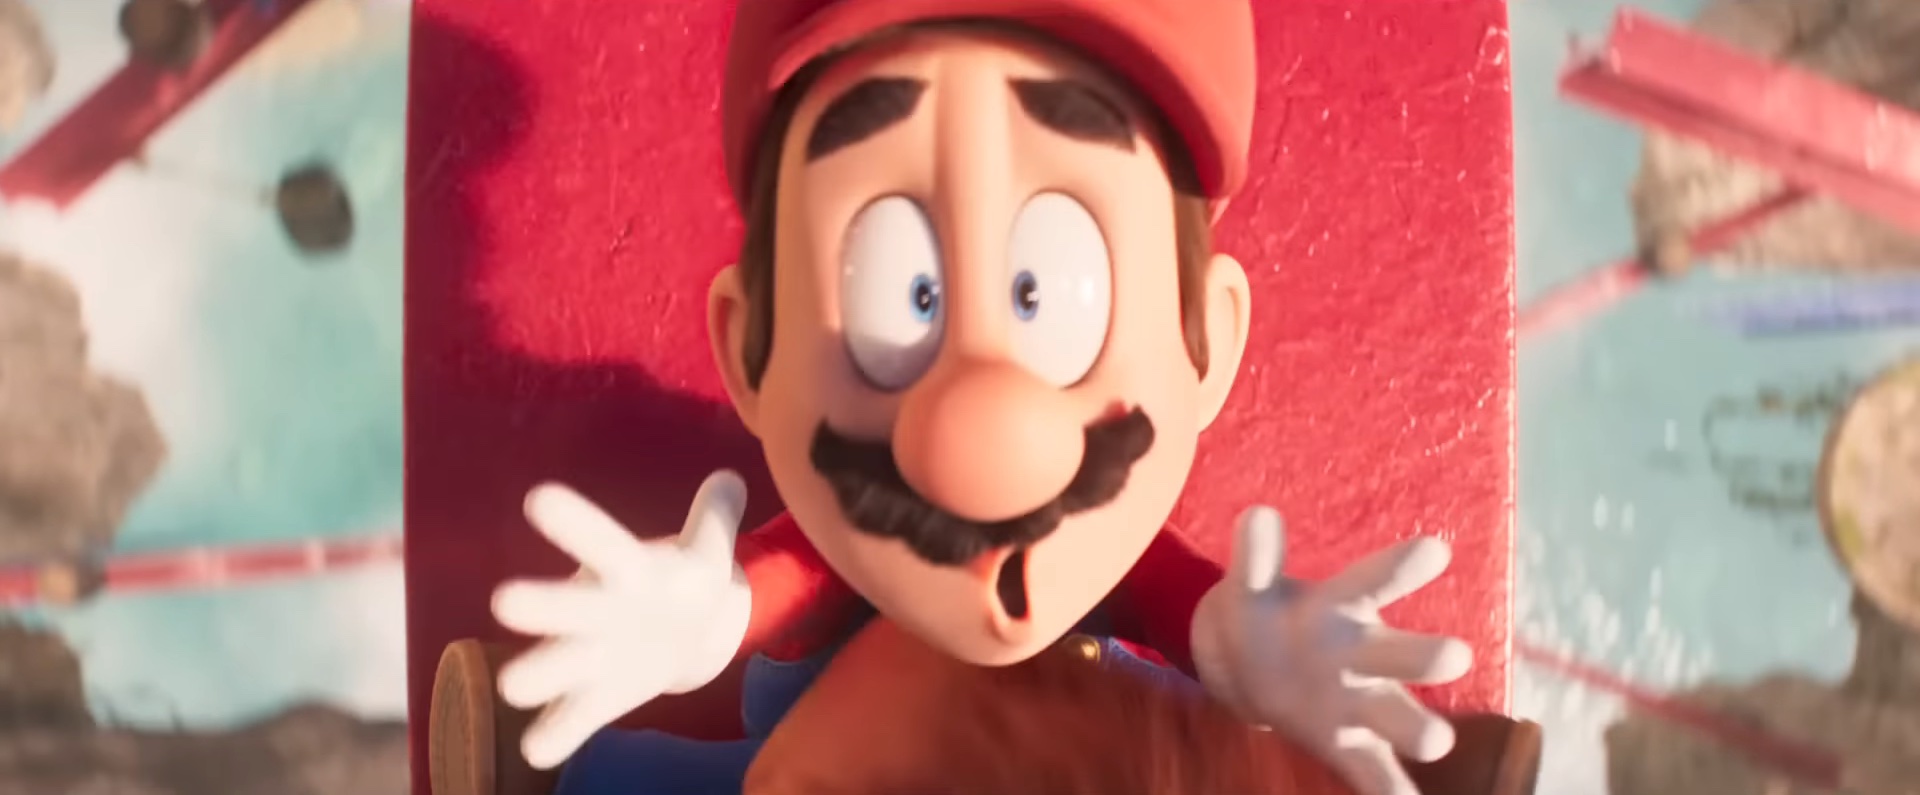 Super Mario Bros. The Movie' is Coming Much Later on Neflix than its  Theatrical Release—Here's When